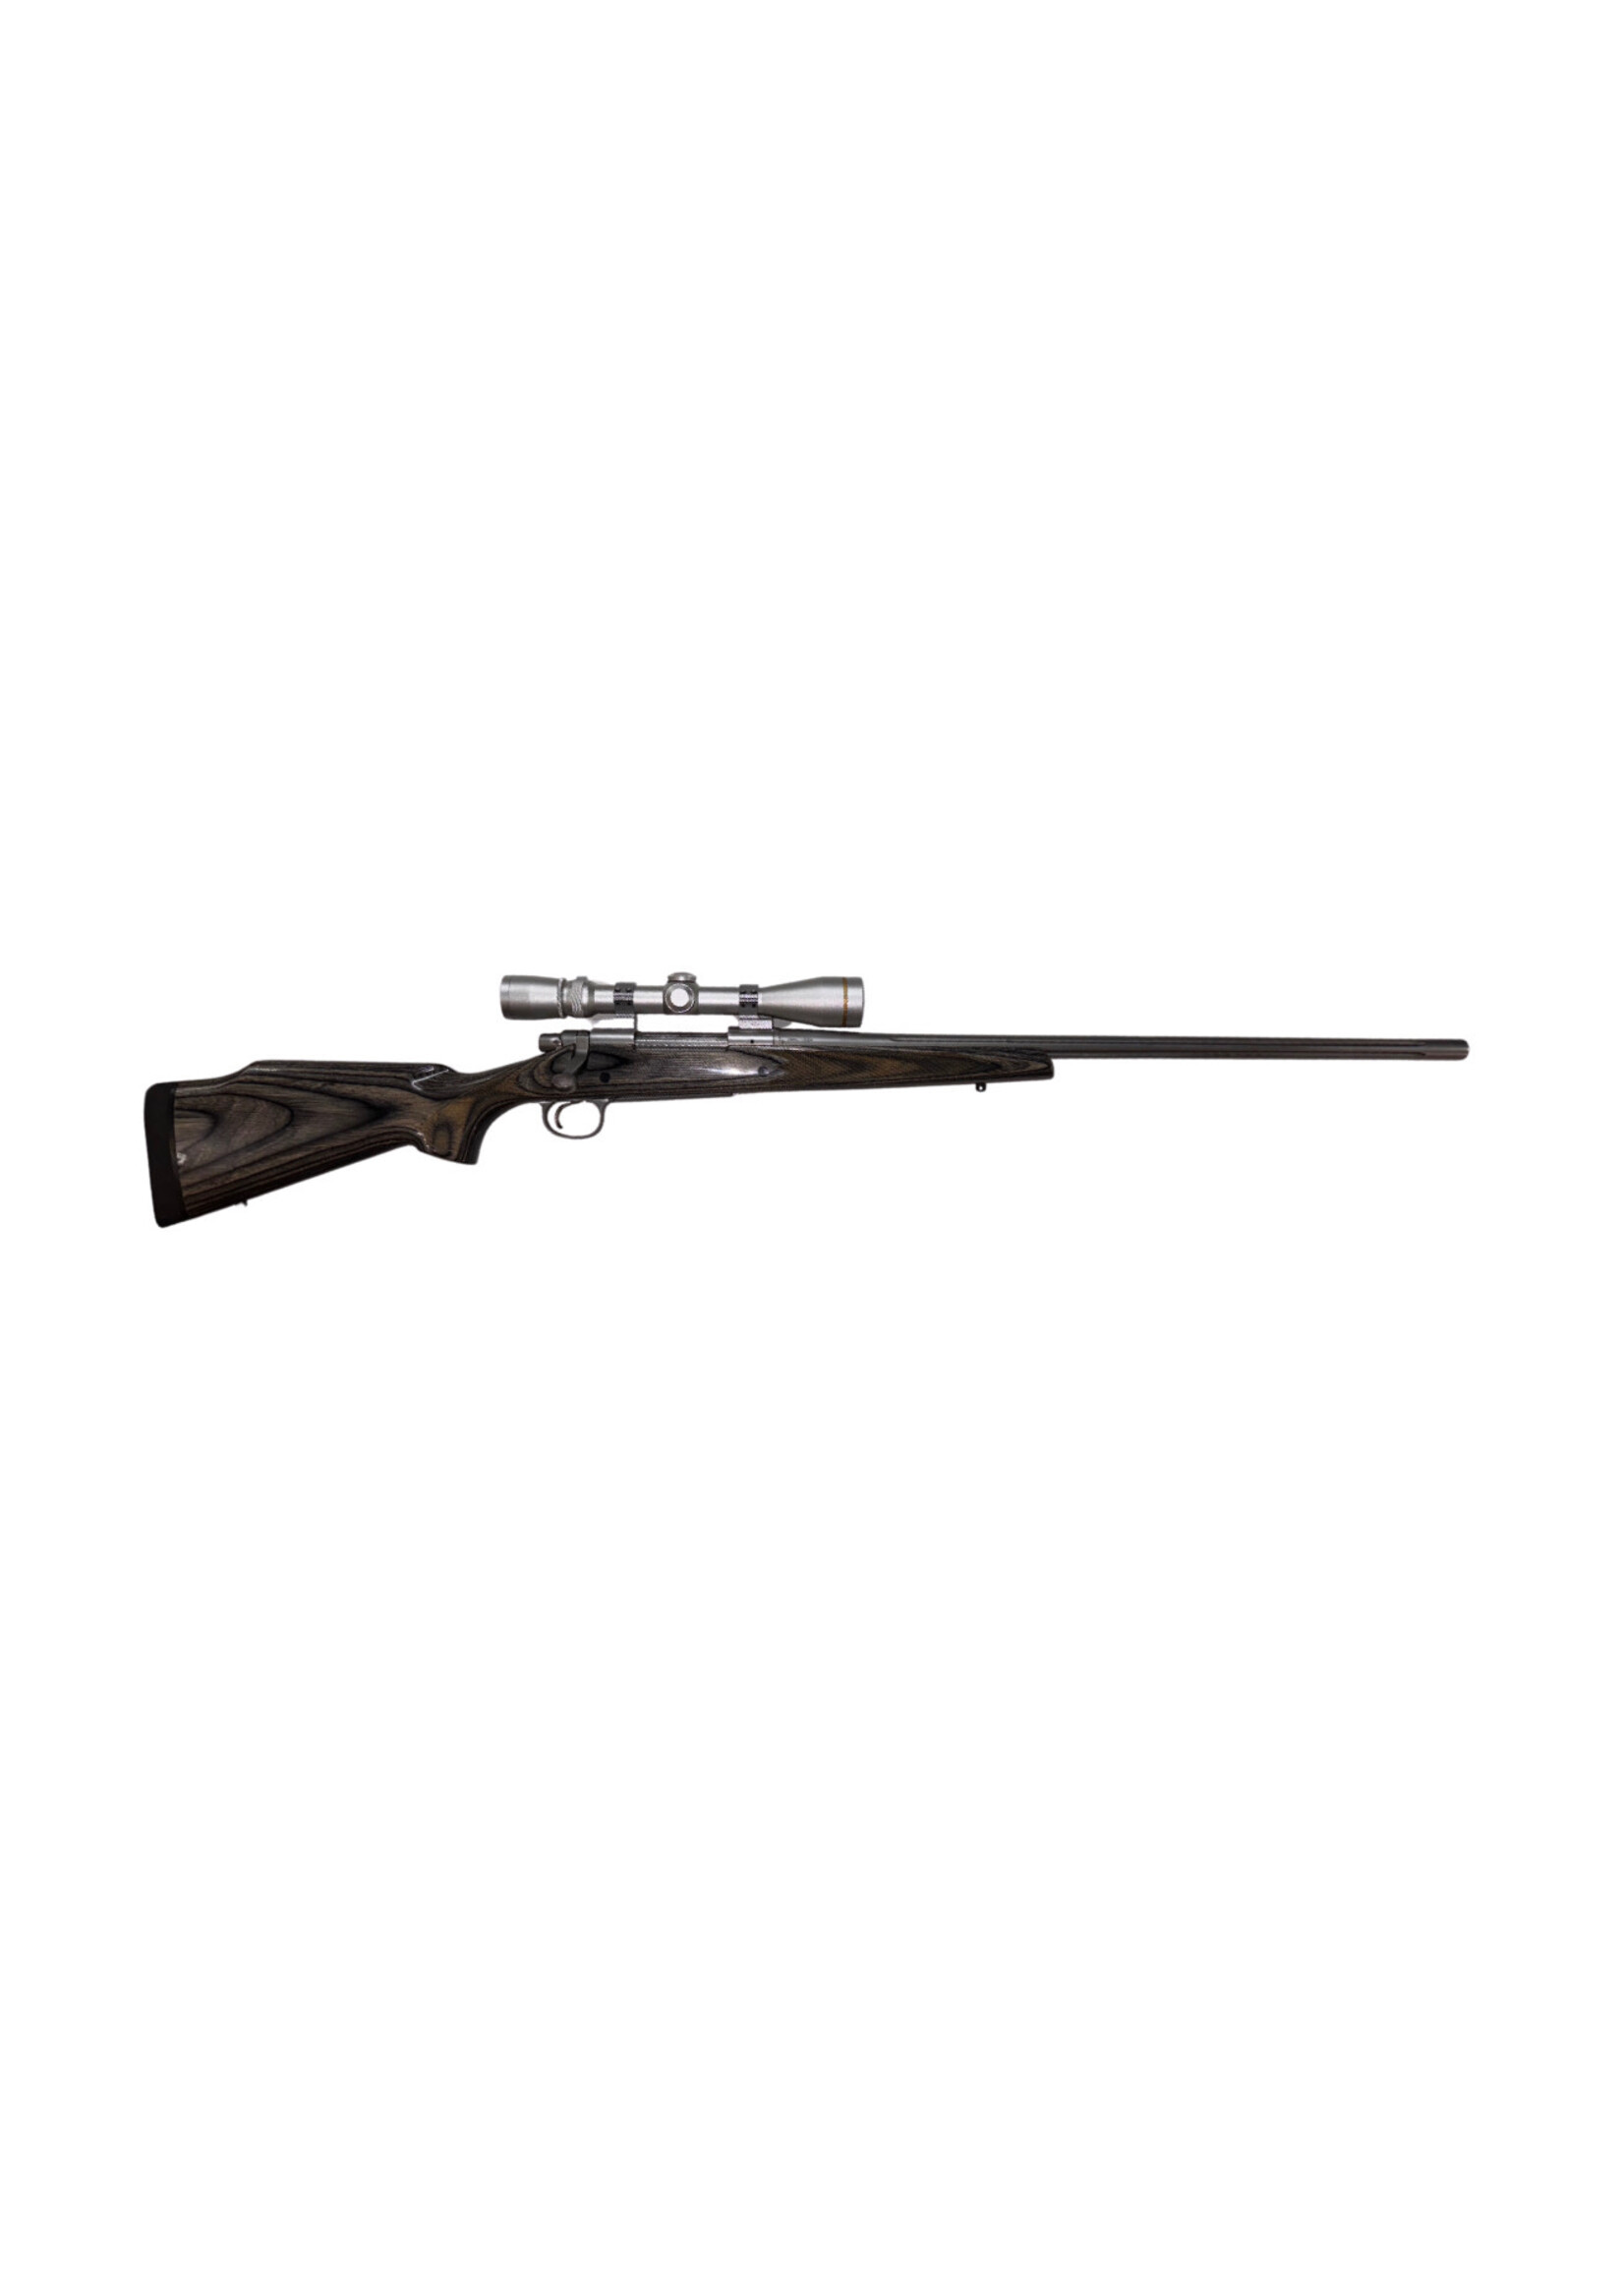 REMINGTON USED REMINGTON 338 RUM MODEL 700 S/S FLUTED 26” BRL GREY LAMINATE STOCK W/ LEUPOLD VXII 3.5-10 X 40/ 4 BOXES OF AMMO